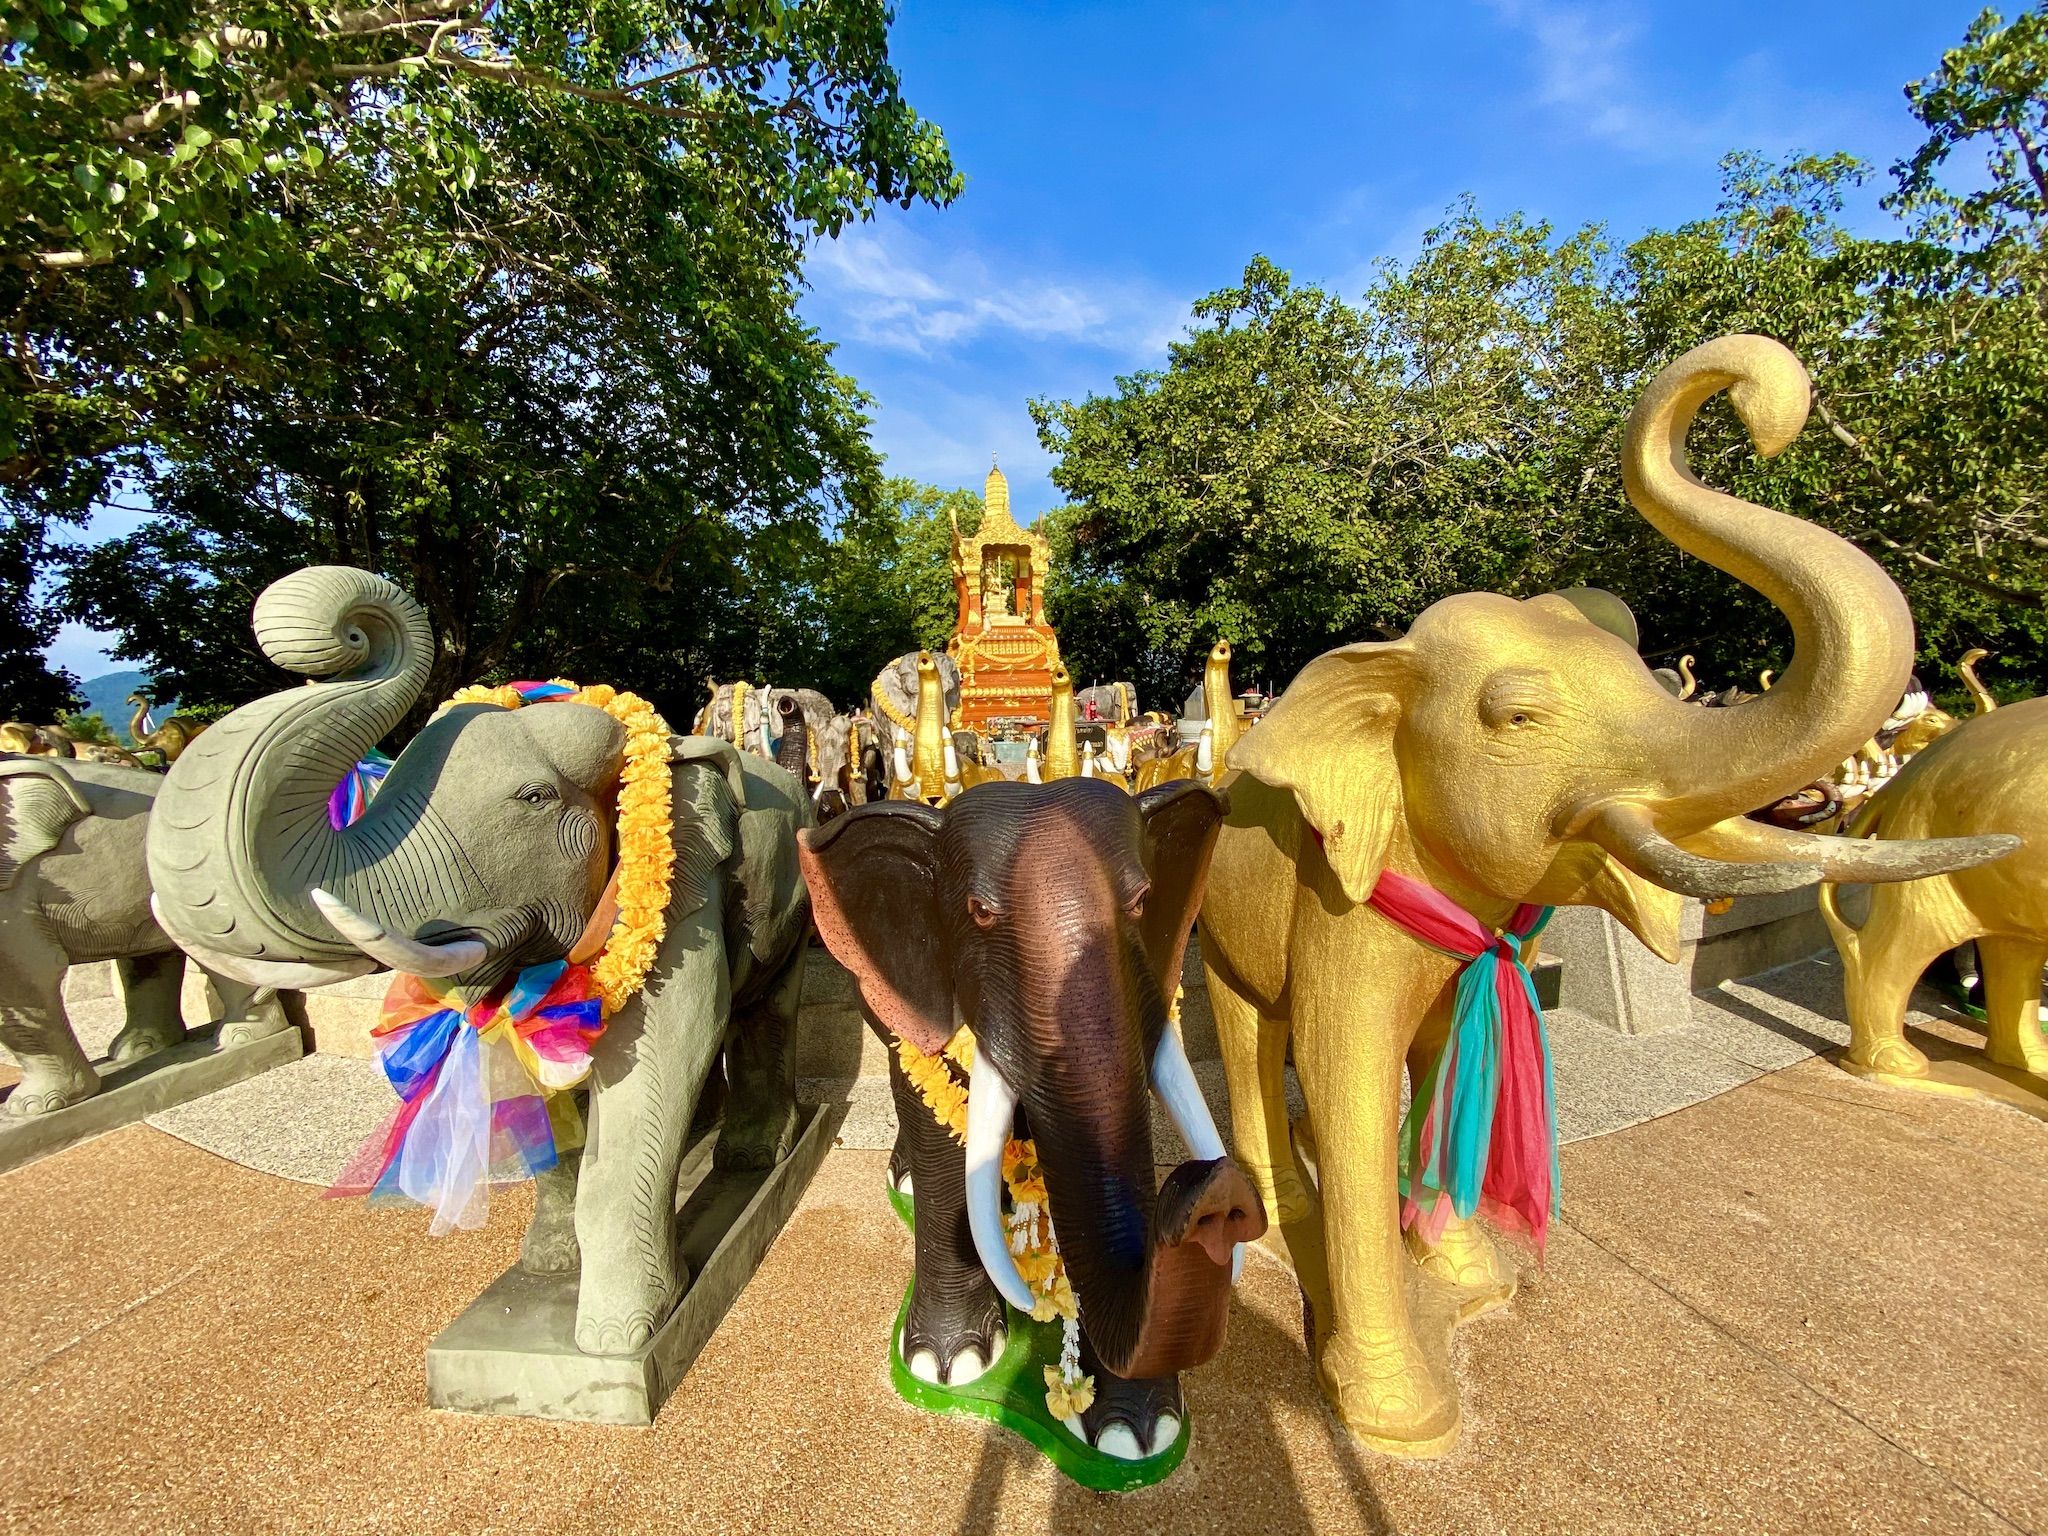 At Promthep Cape you will find a temple with numerous elephant statues. Photo: Sascha Tegtmeyer